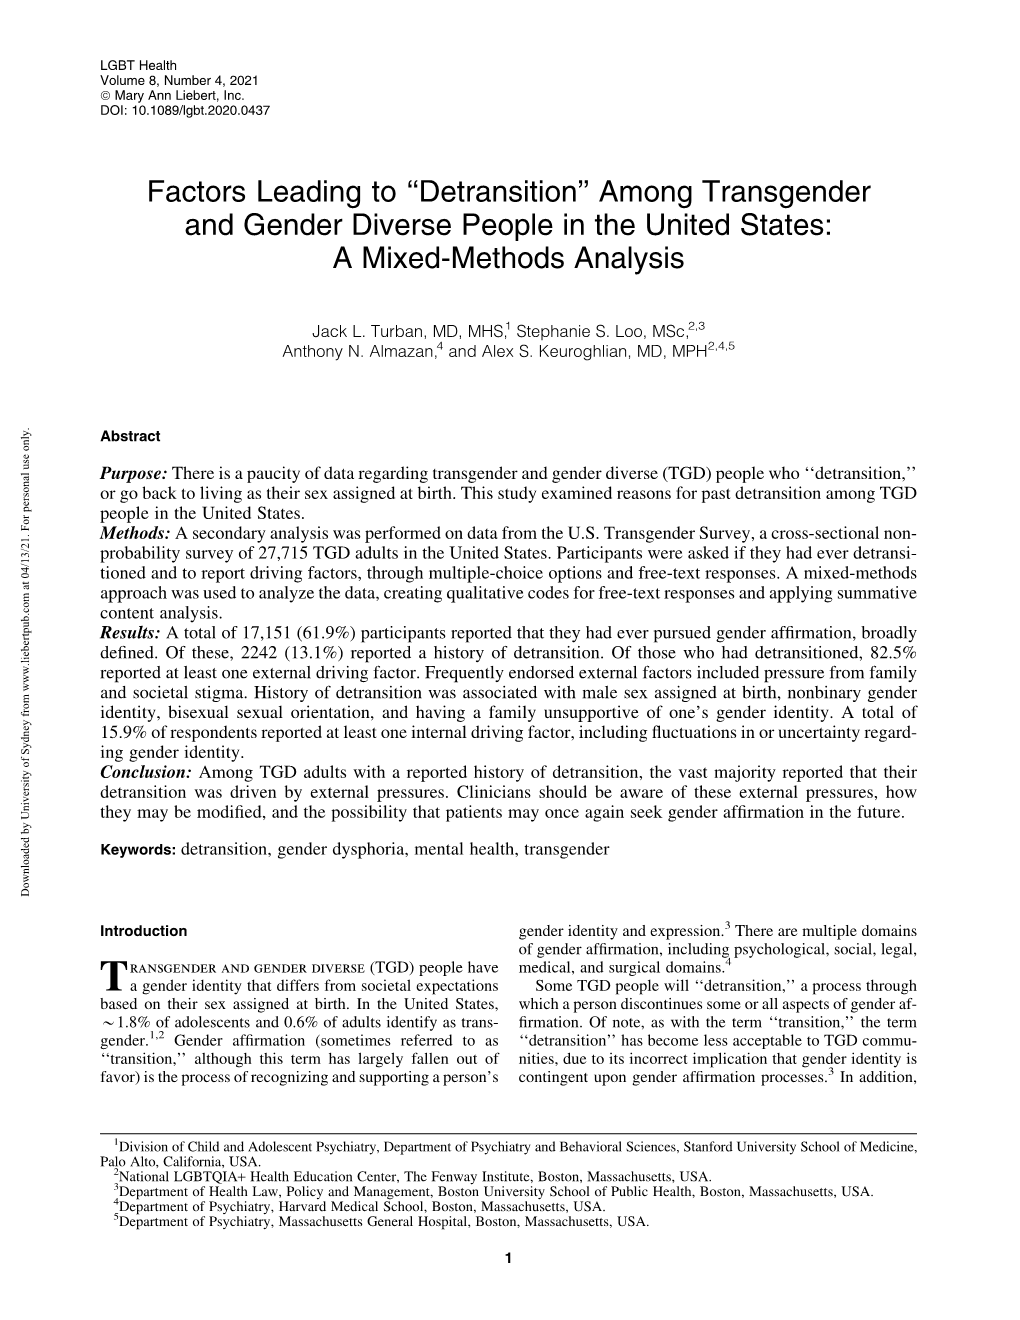 Detransition’’ Among Transgender and Gender Diverse People in the United States: a Mixed-Methods Analysis